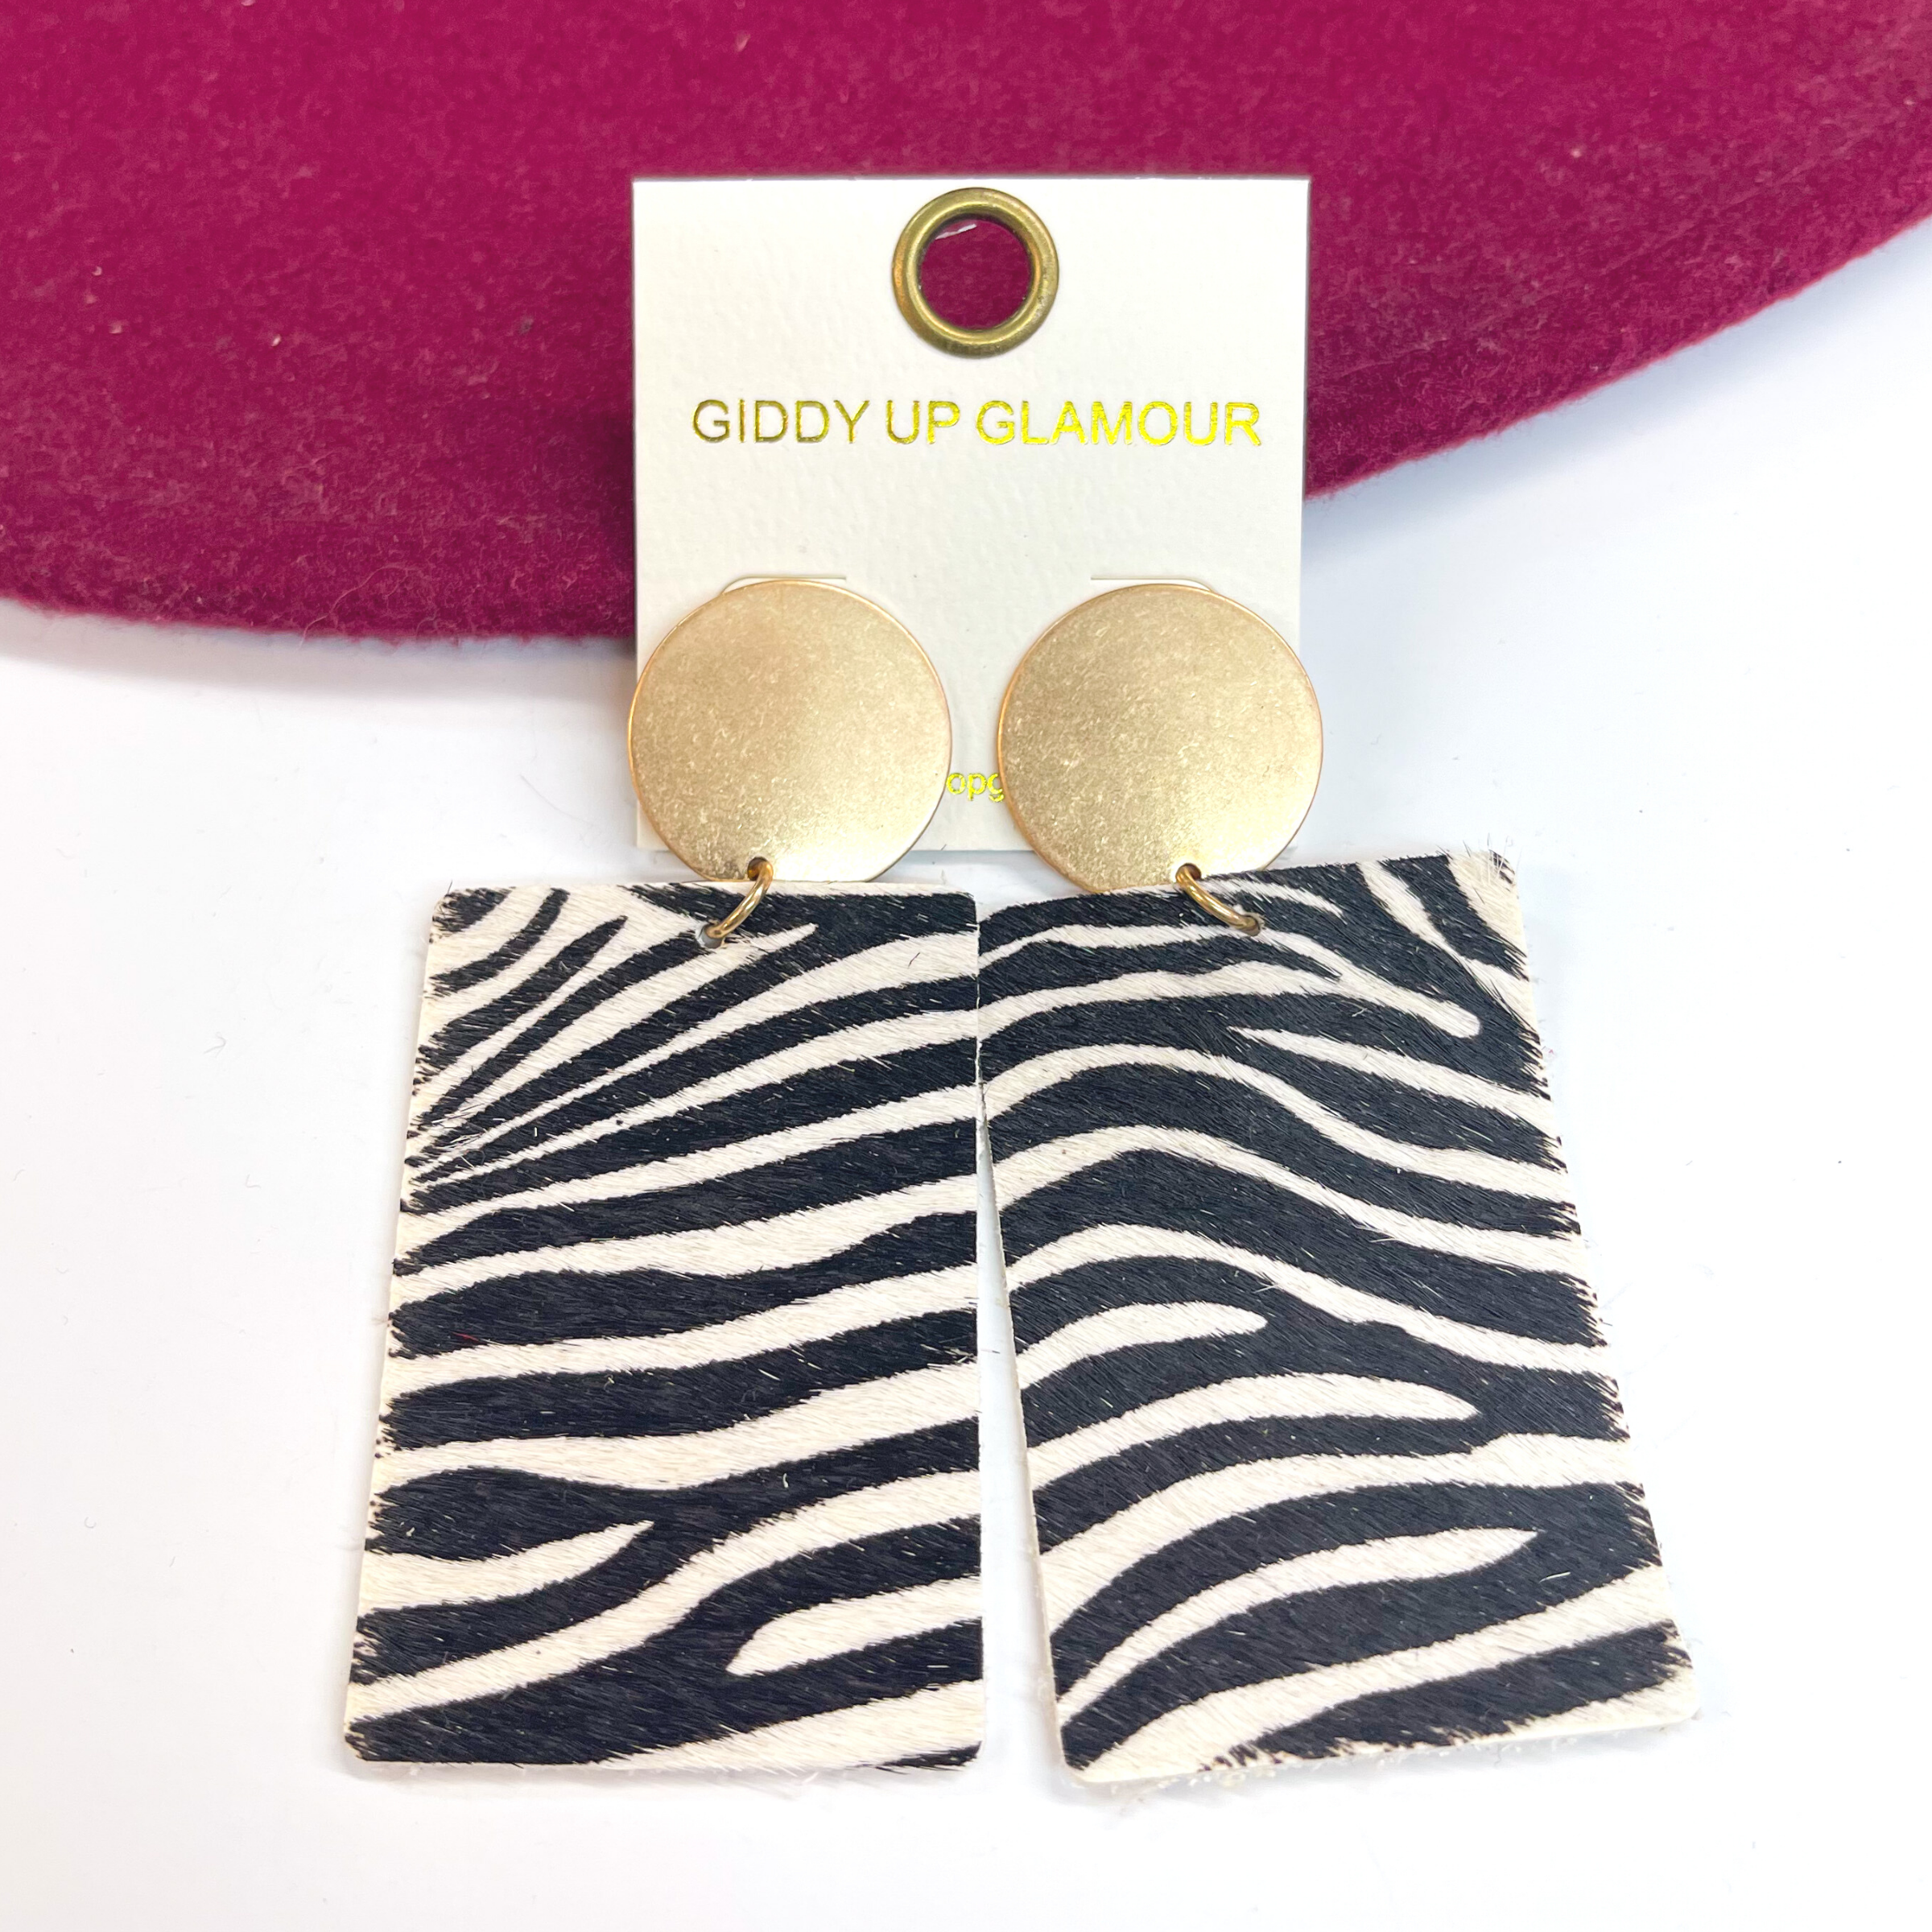 Gold circle stud earrings with zebra print on  leather hide. Taken on a white background and  leaned up against a burgundy hat.